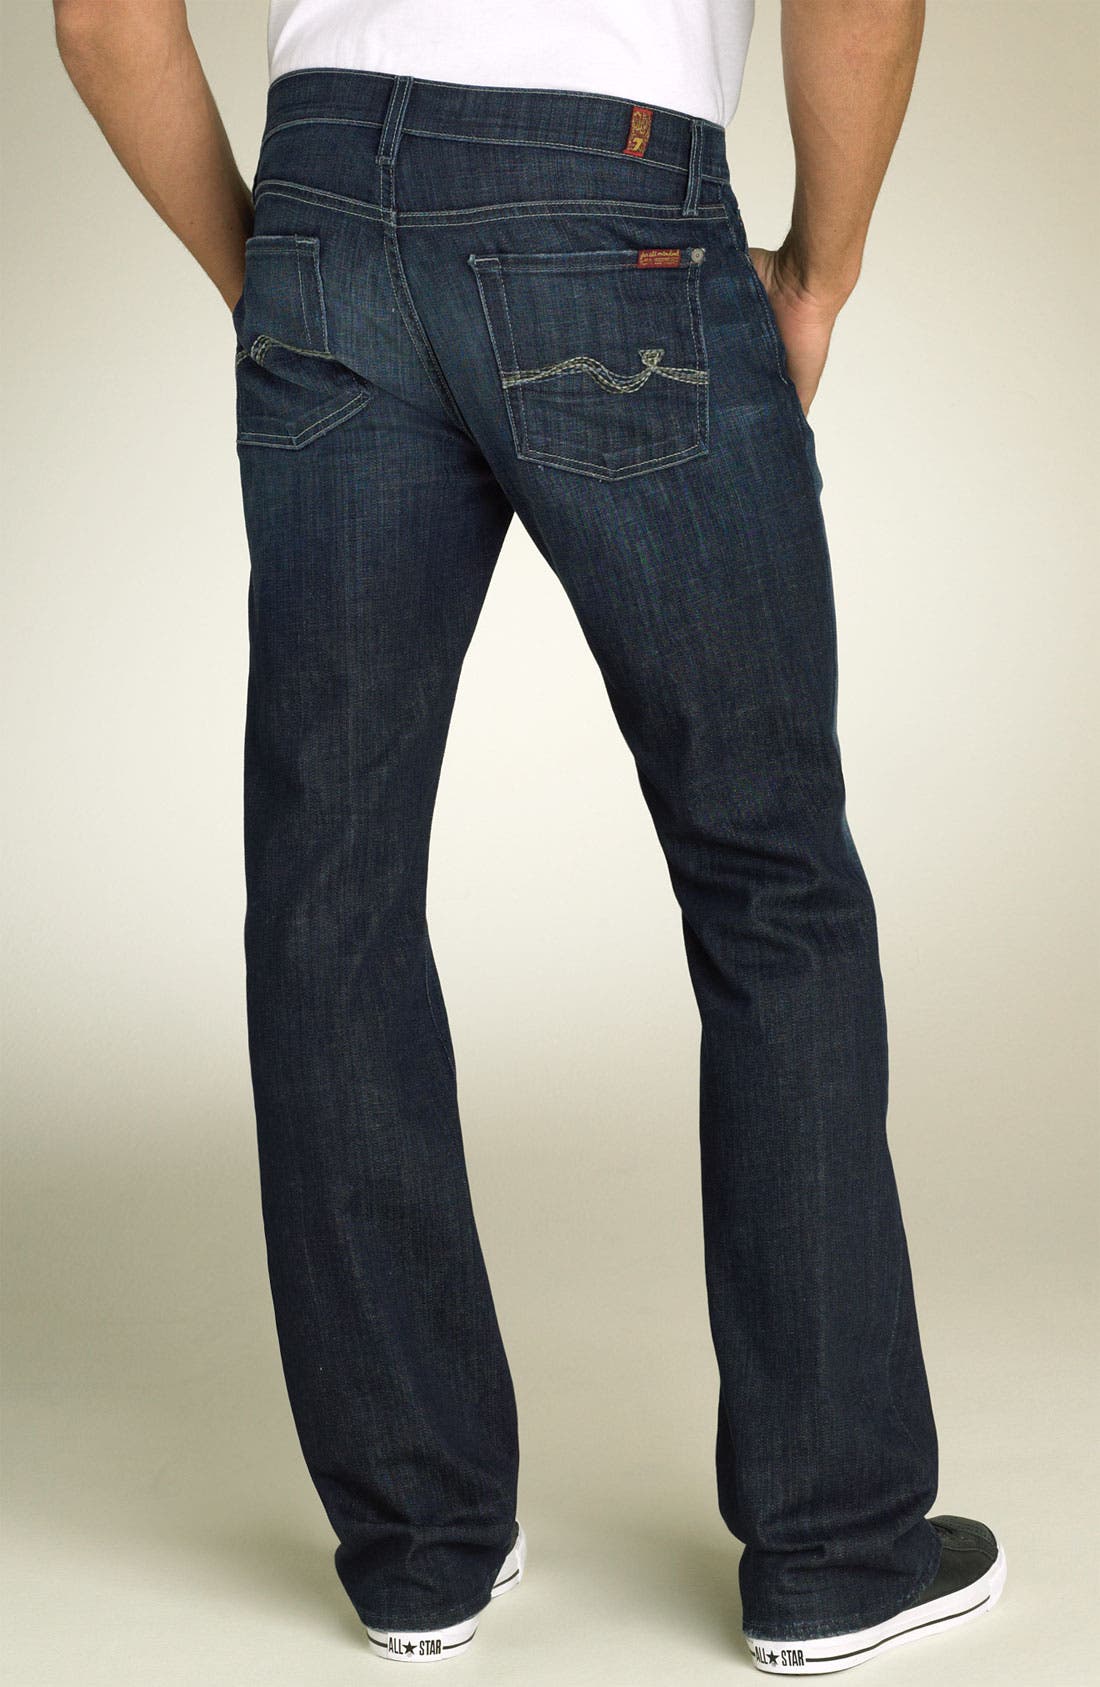 jeans with squiggle on back pocket